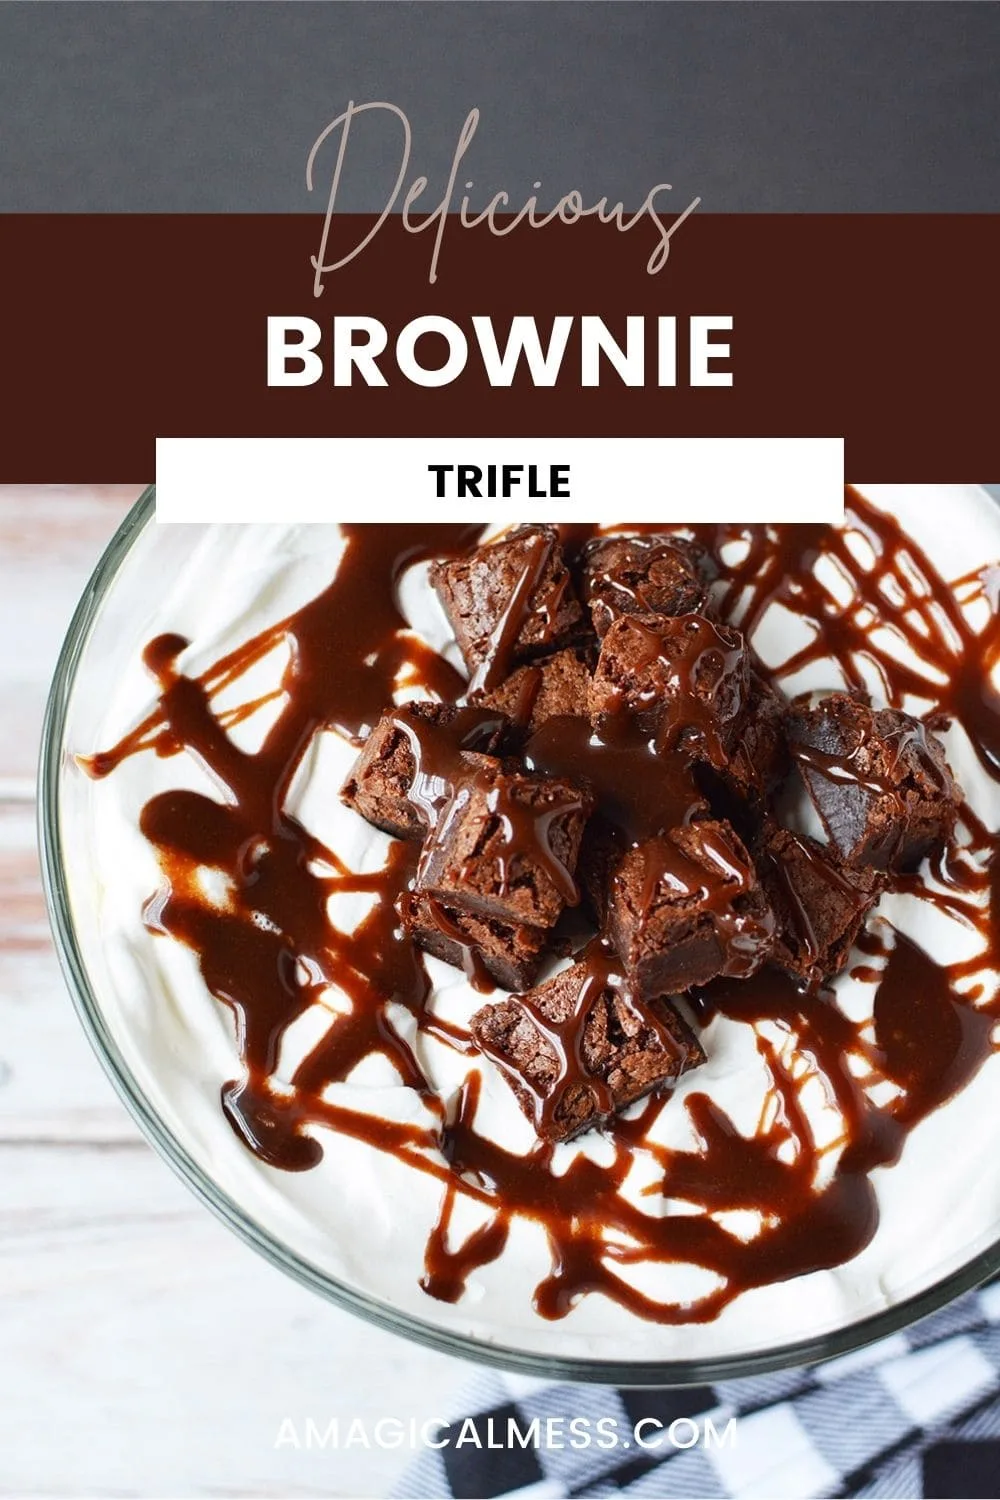 Brownie trifle with hot fudge drizzles